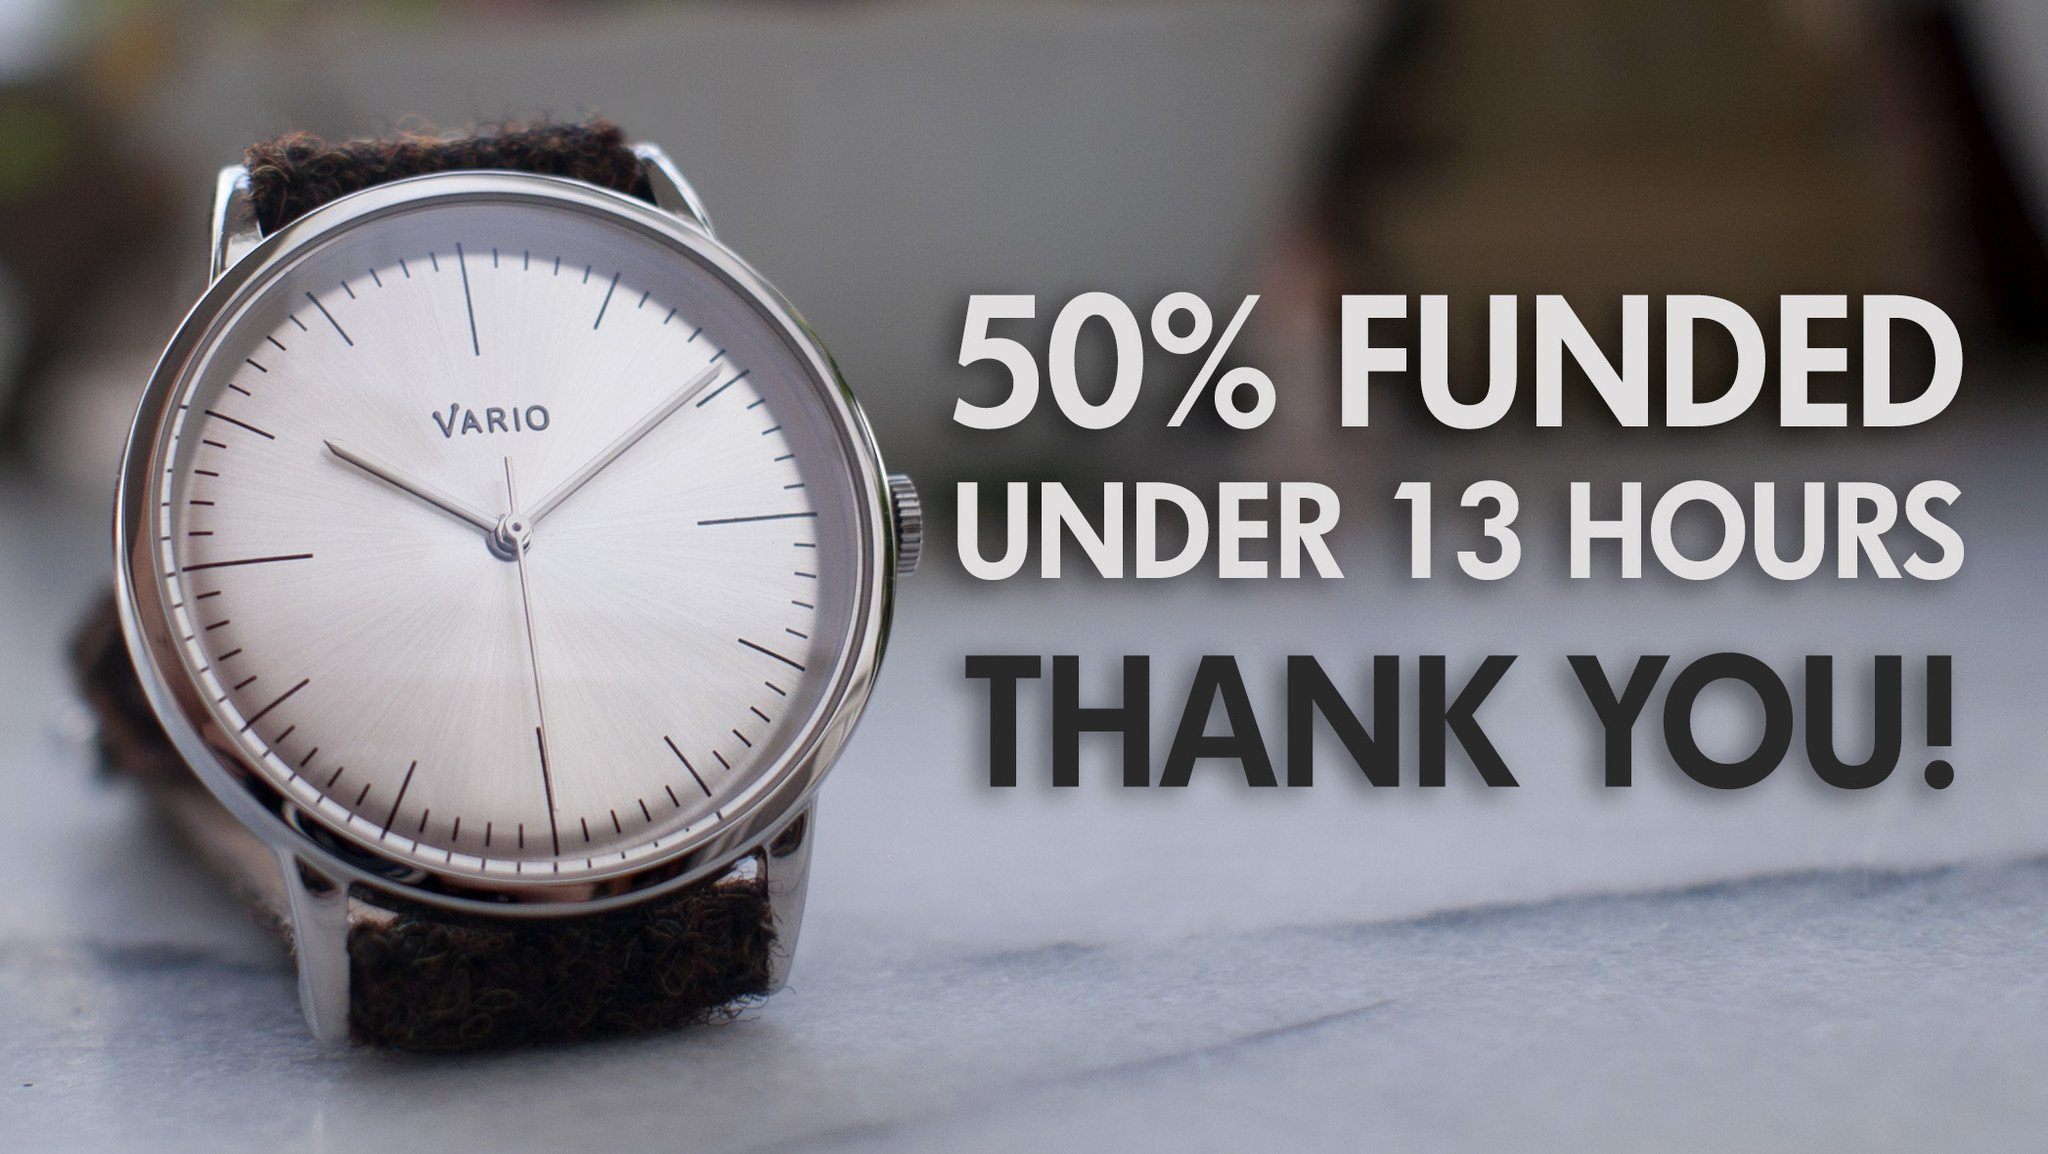 Eclipse Watch 50% Funded within 13 Hours